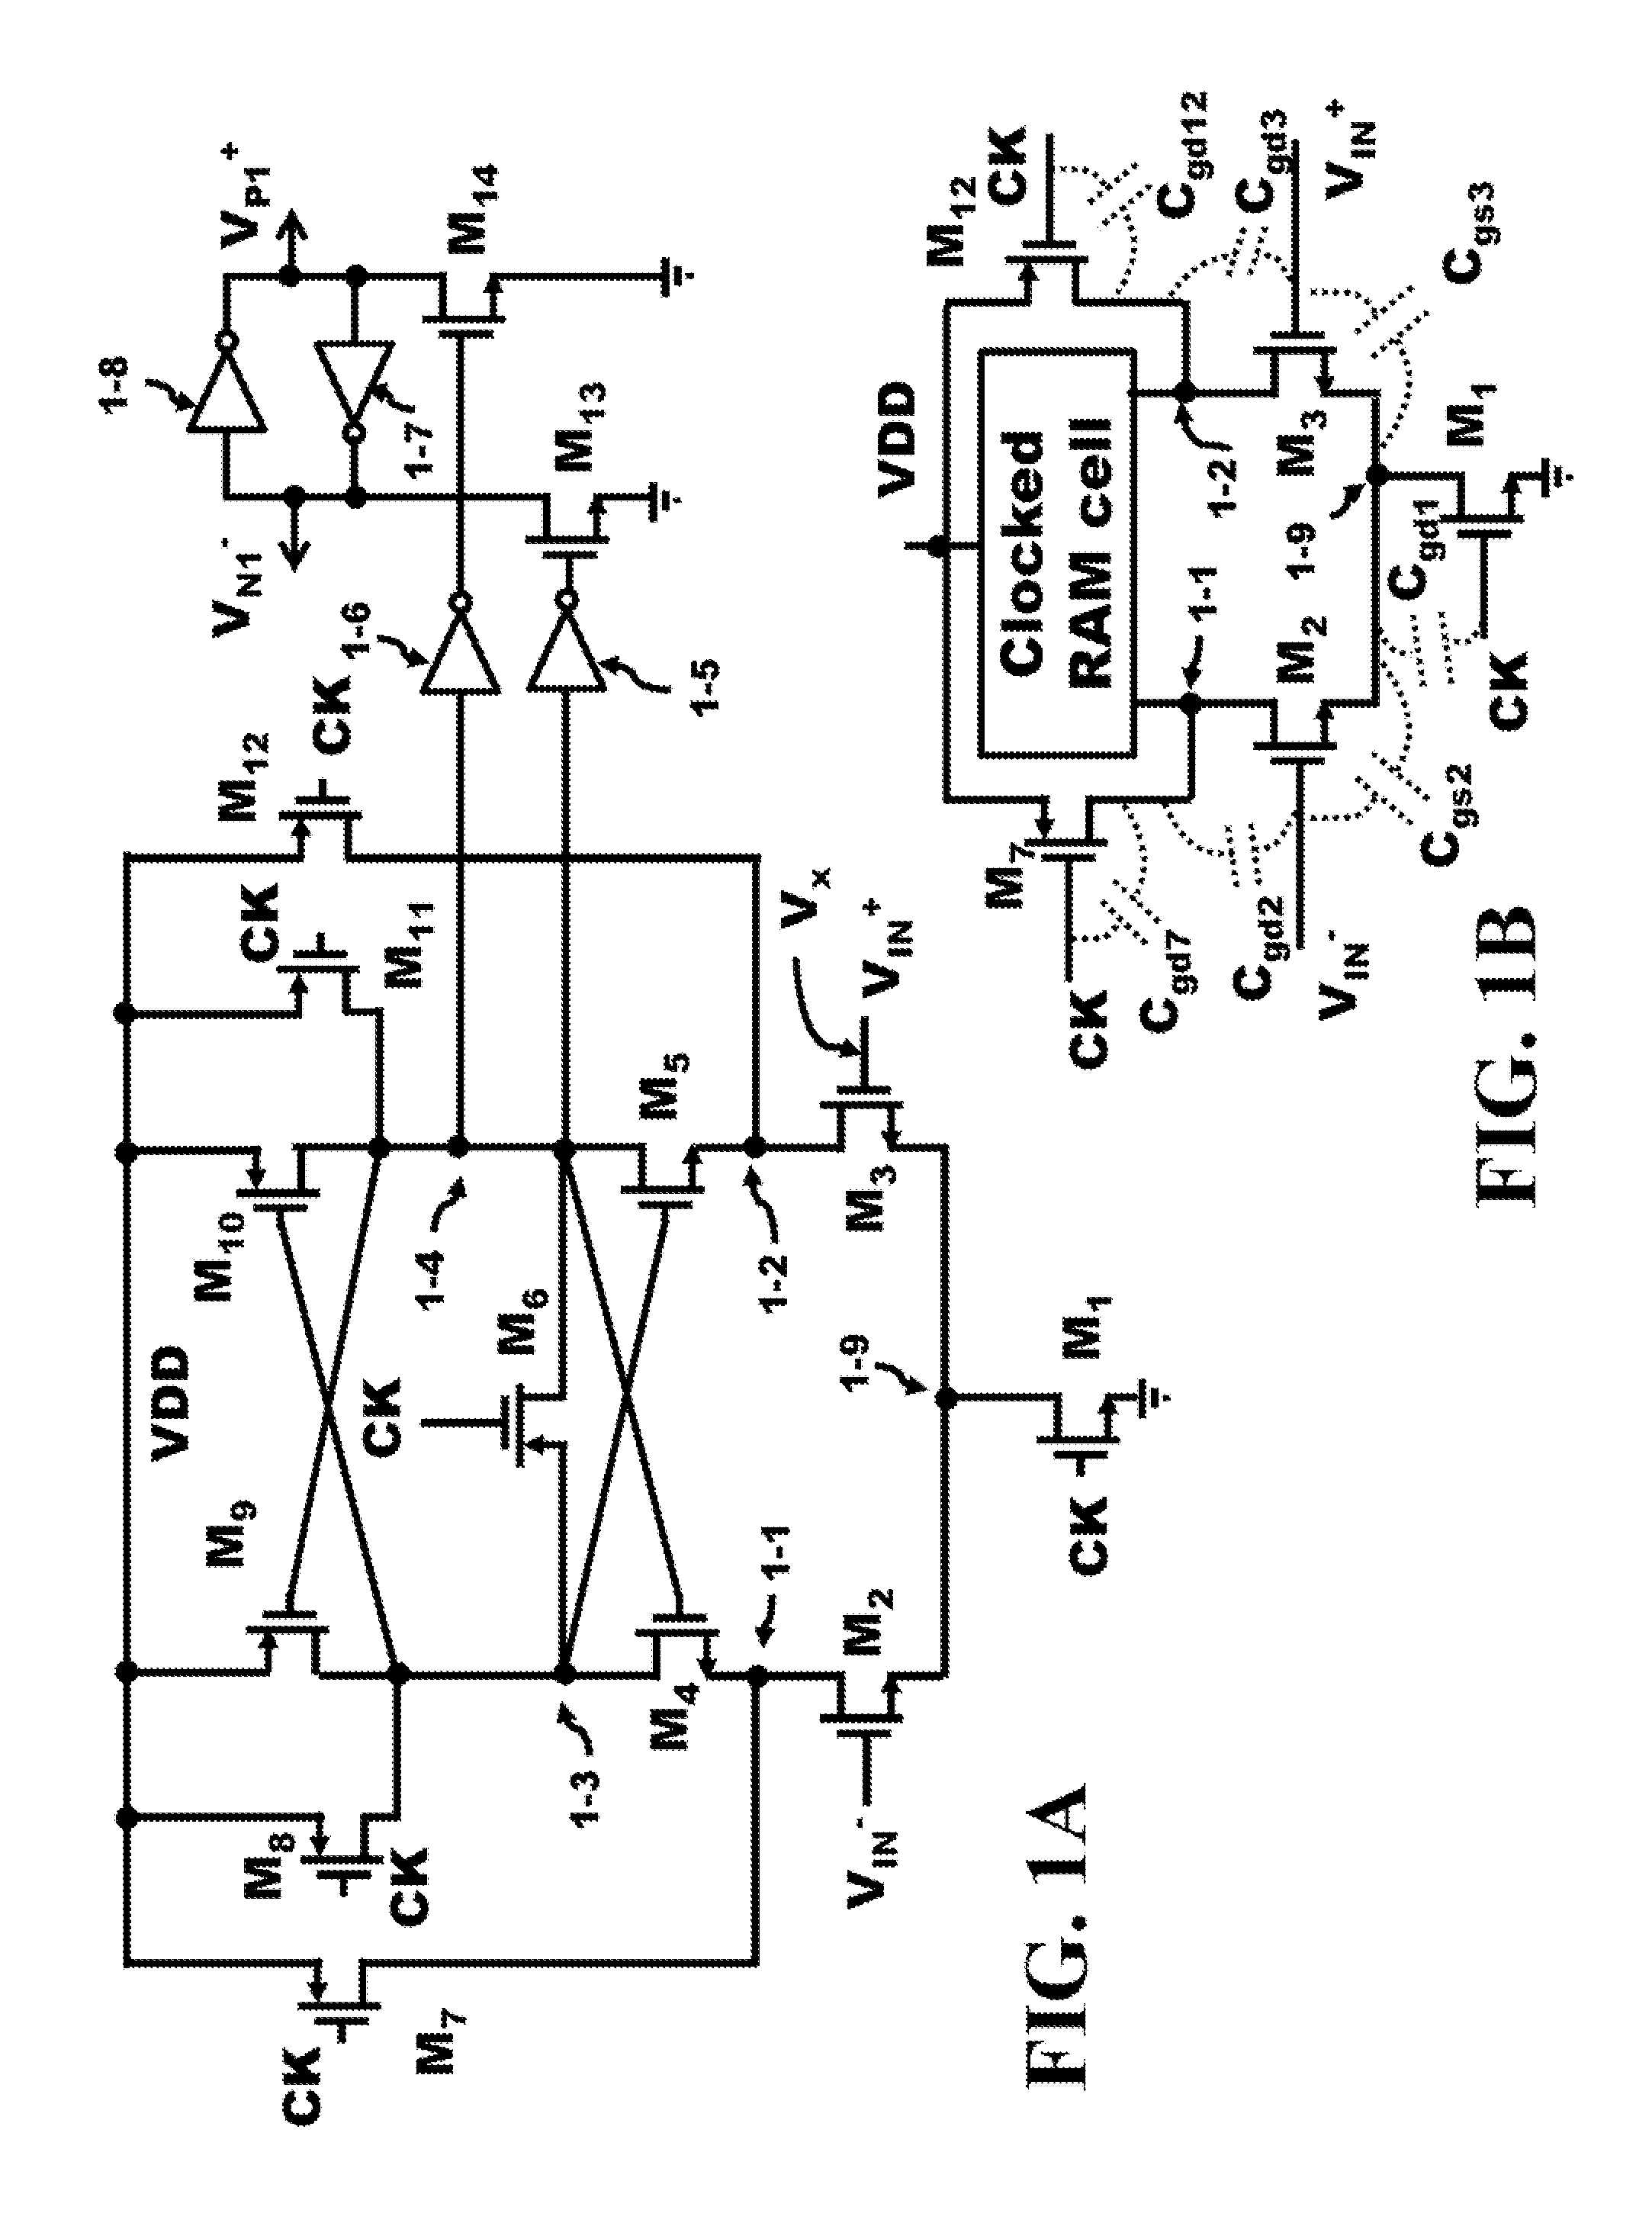 Method and Apparatus for Reducing the Clock Kick-Back of ADC Comparators While Maintaining Transistor Matching Behavior